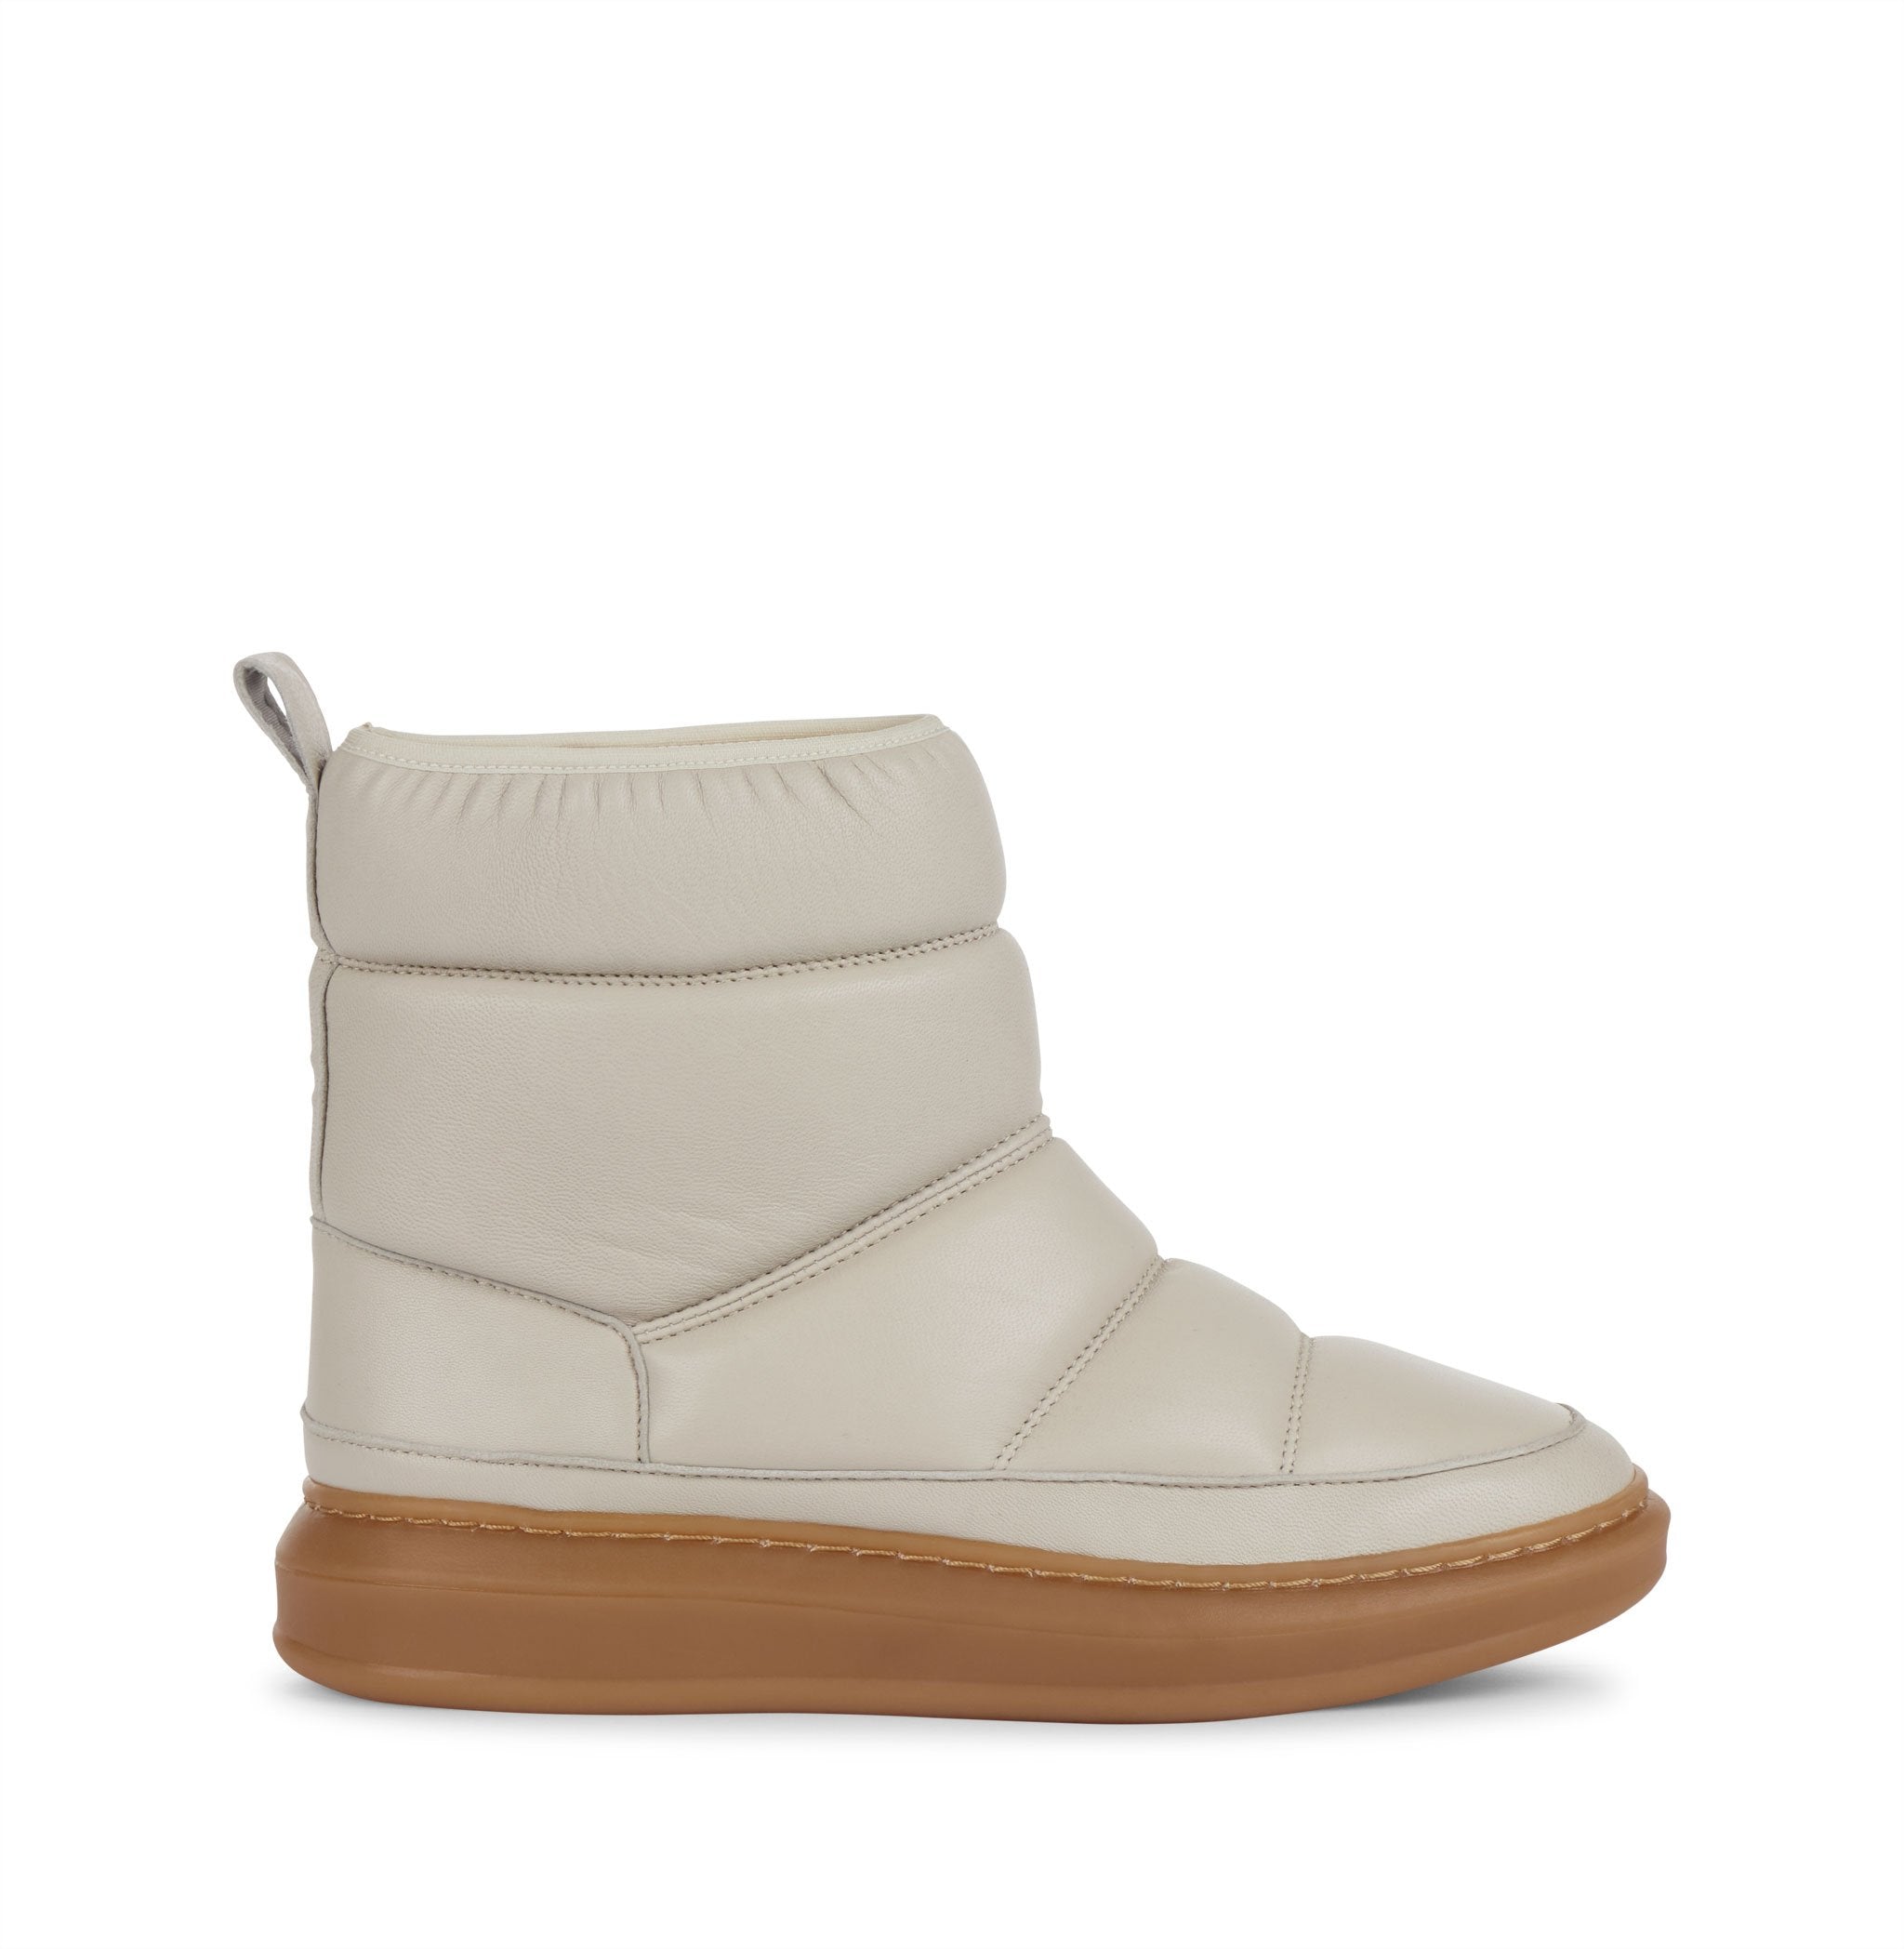 Moon Off White Moon Boots 13-004-011-Off White -1